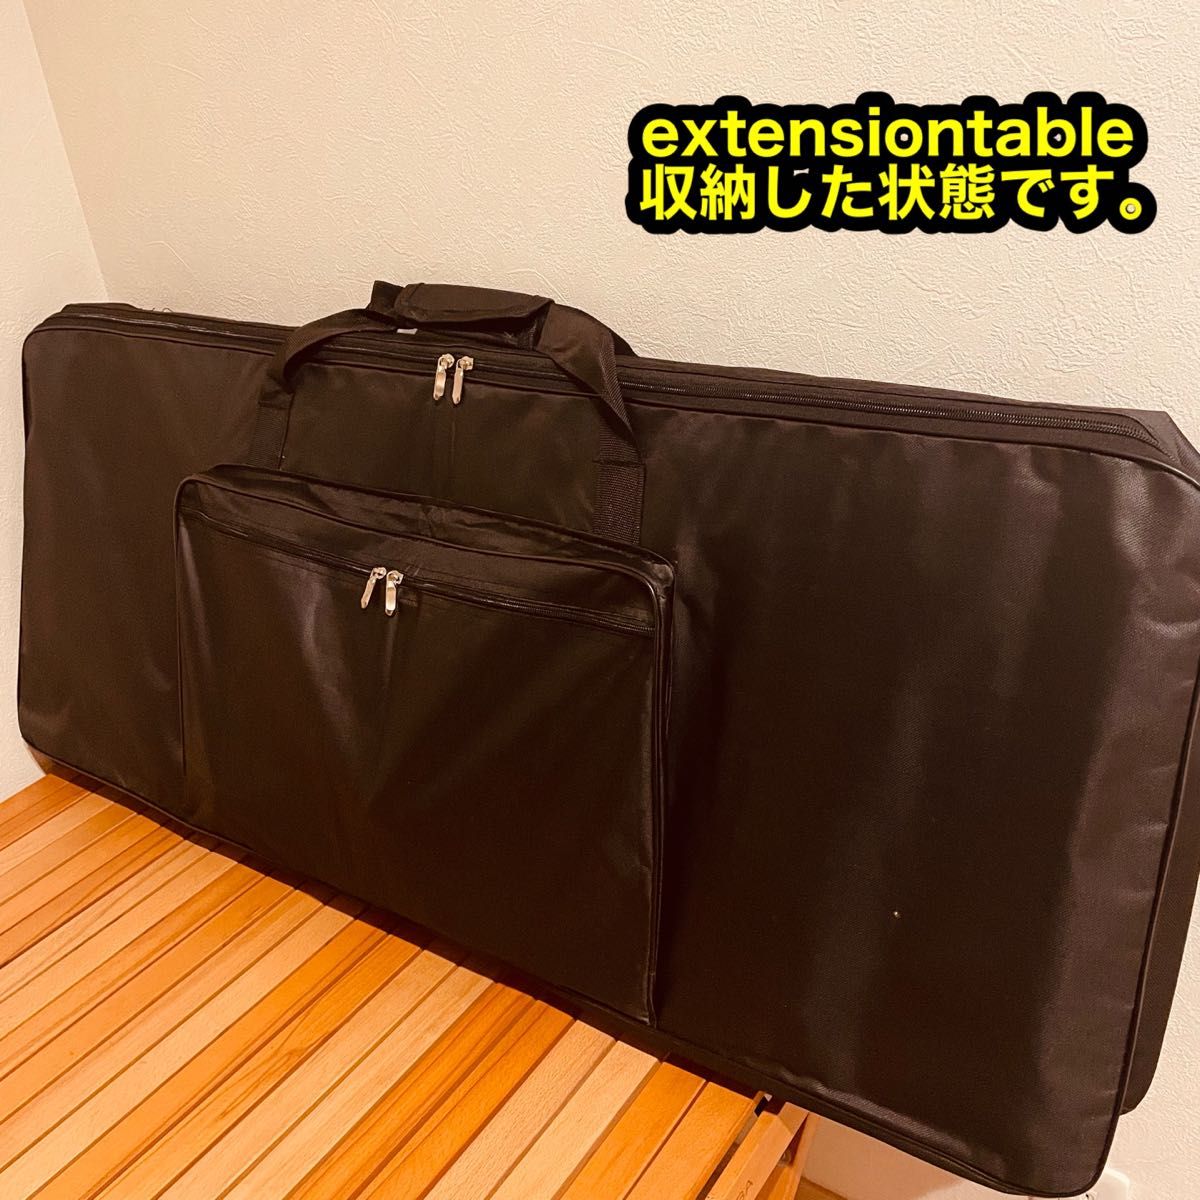 www_extensiontable フラットバーナー 収納ケース IGT